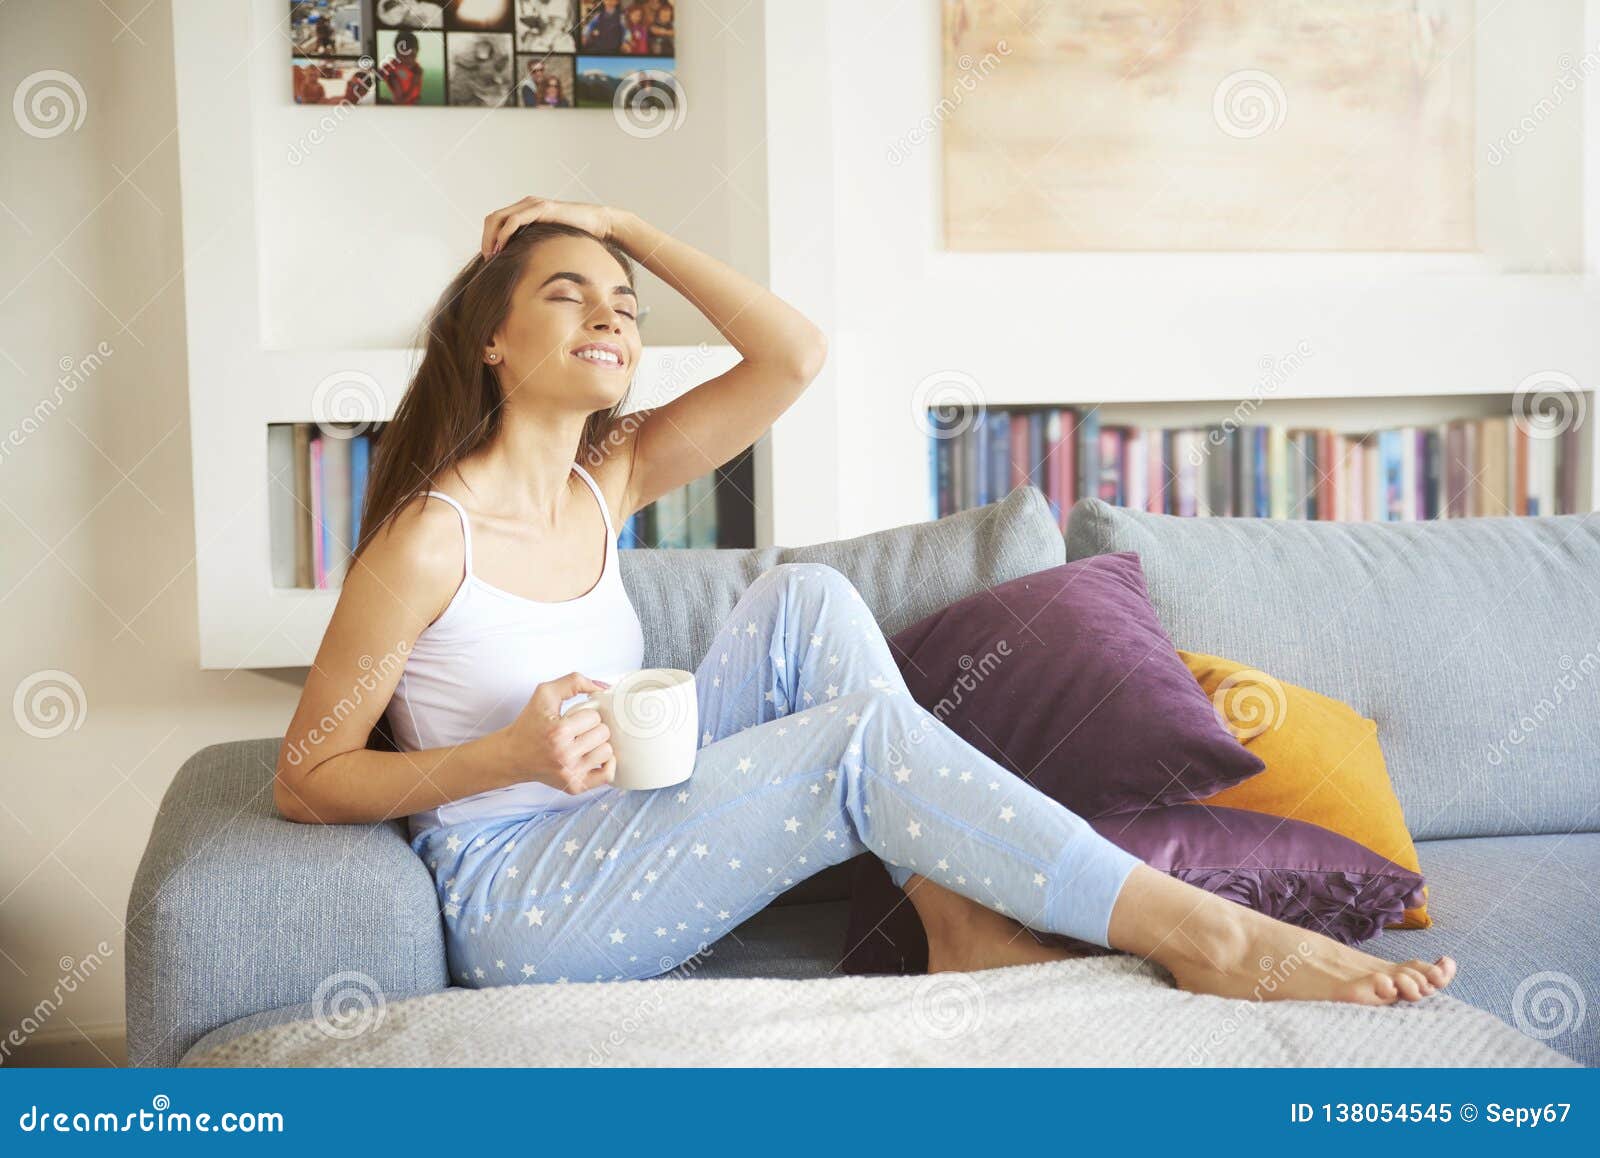 Young Woman Relaxing On Sofa Early Morning Stock Image Image Of Adult